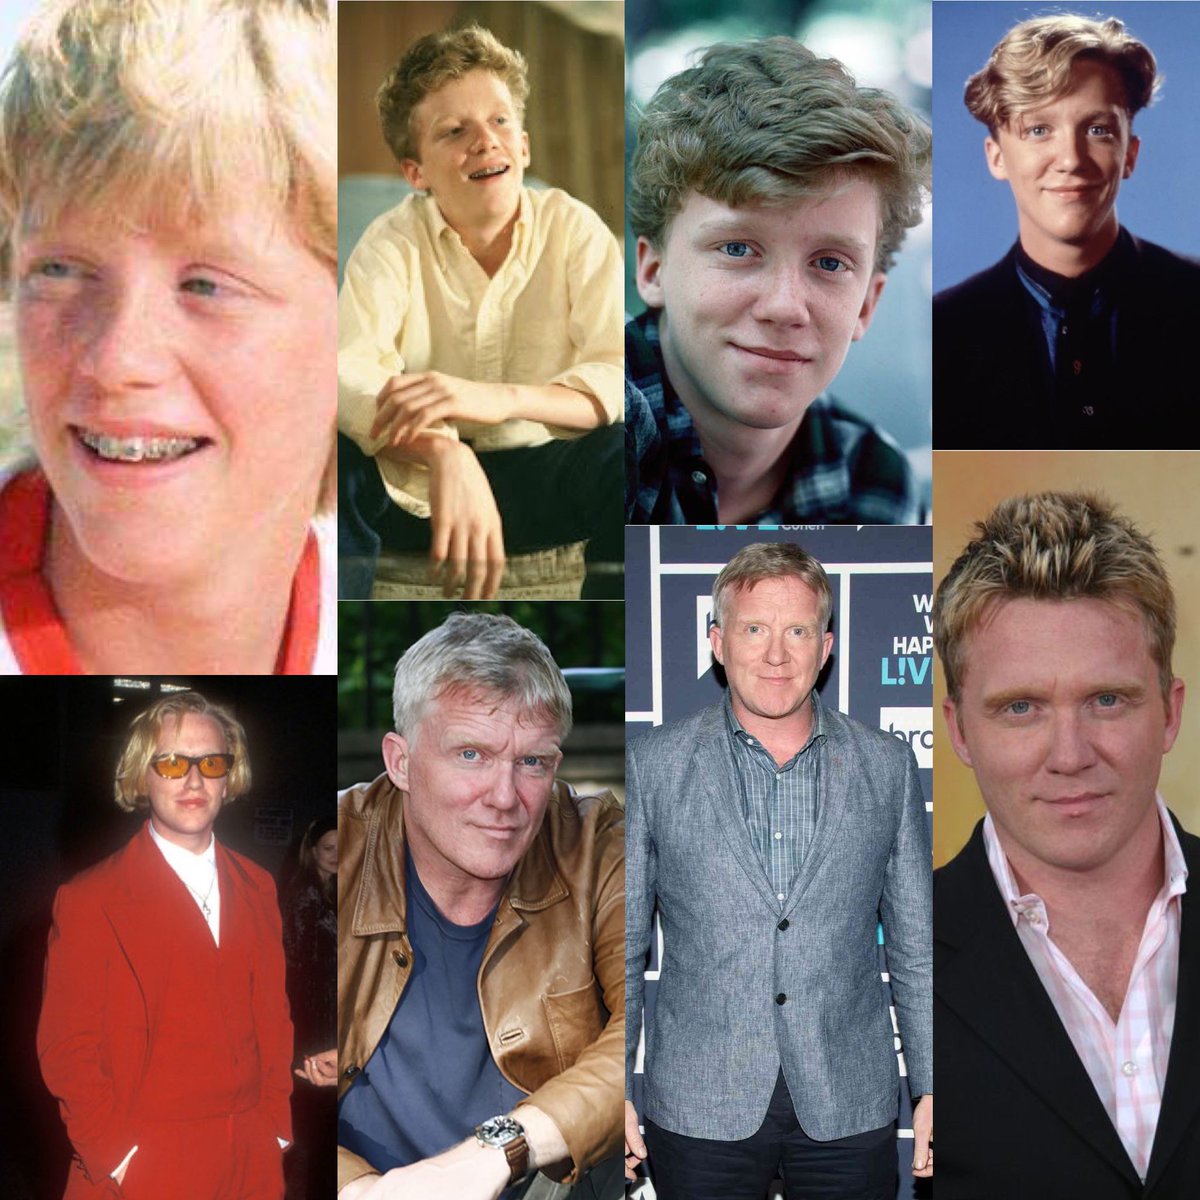 🎉 Happy 56th Birthday to Anthony Michael Hall! 🎂 Born on April 14, 1968, he is an accomplished actor known for his roles in iconic 1980s films such as 'Vacation', 'Sixteen Candles', 'The Breakfast Club' and 'Weird Science.' #the80srule #HappyBirthdayAnthonyMichaelHall